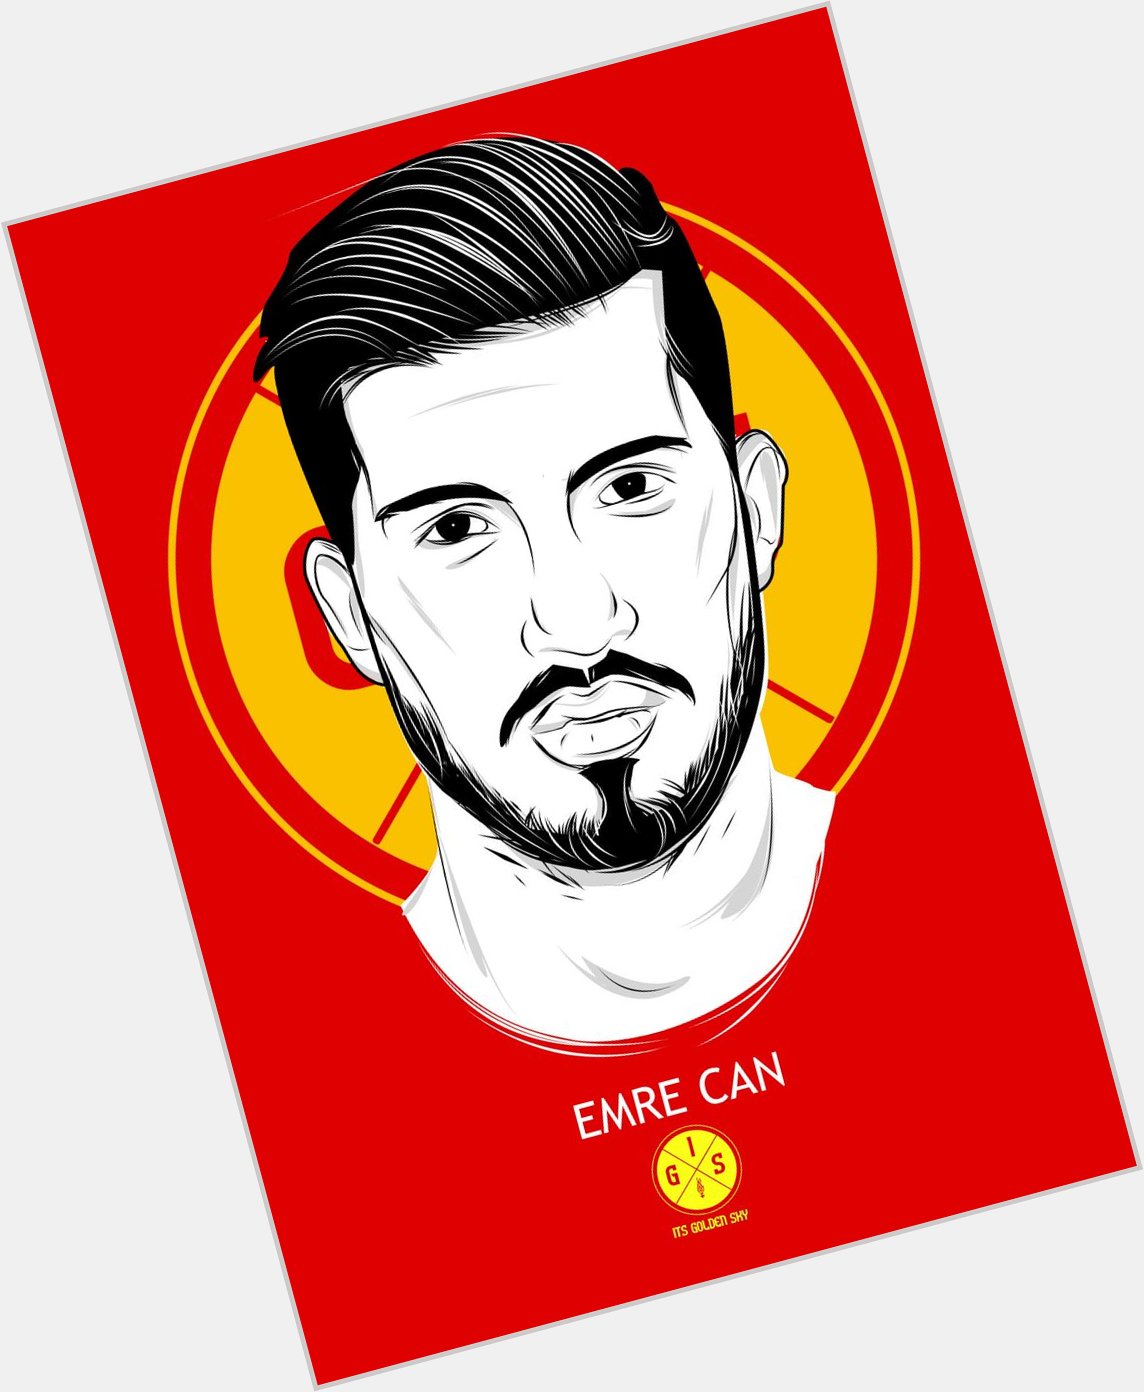 Happy Birthday to Emre Can who turned 21 today. 